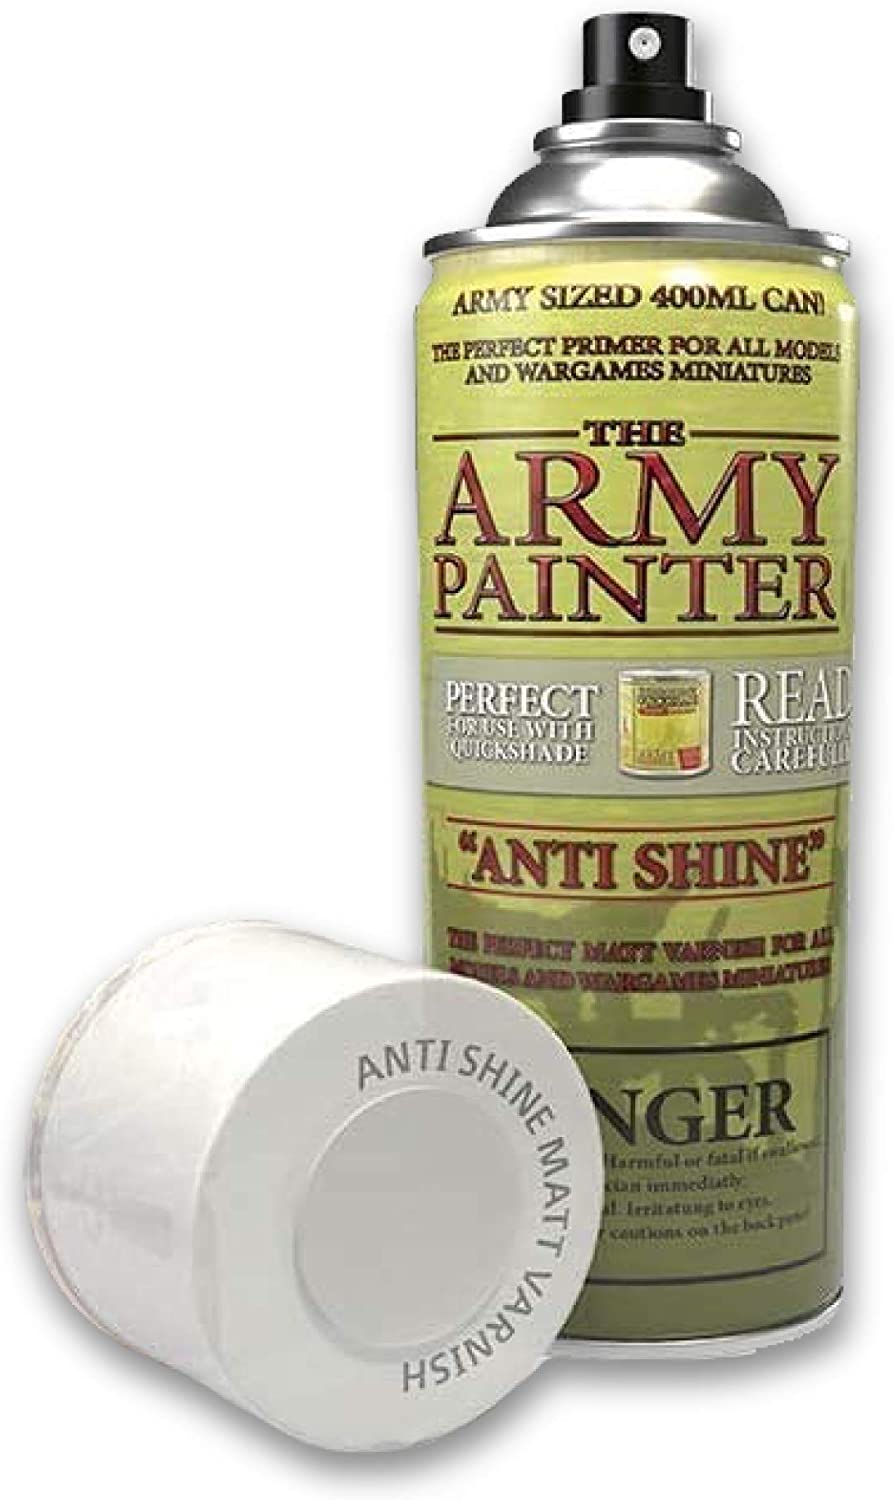 Army Painter Anti Shine Matt Varnish (Cannot be shipped) - Miniature Games Miniatures Paints & Accessories » Army Painter - The Connection & Hobbies